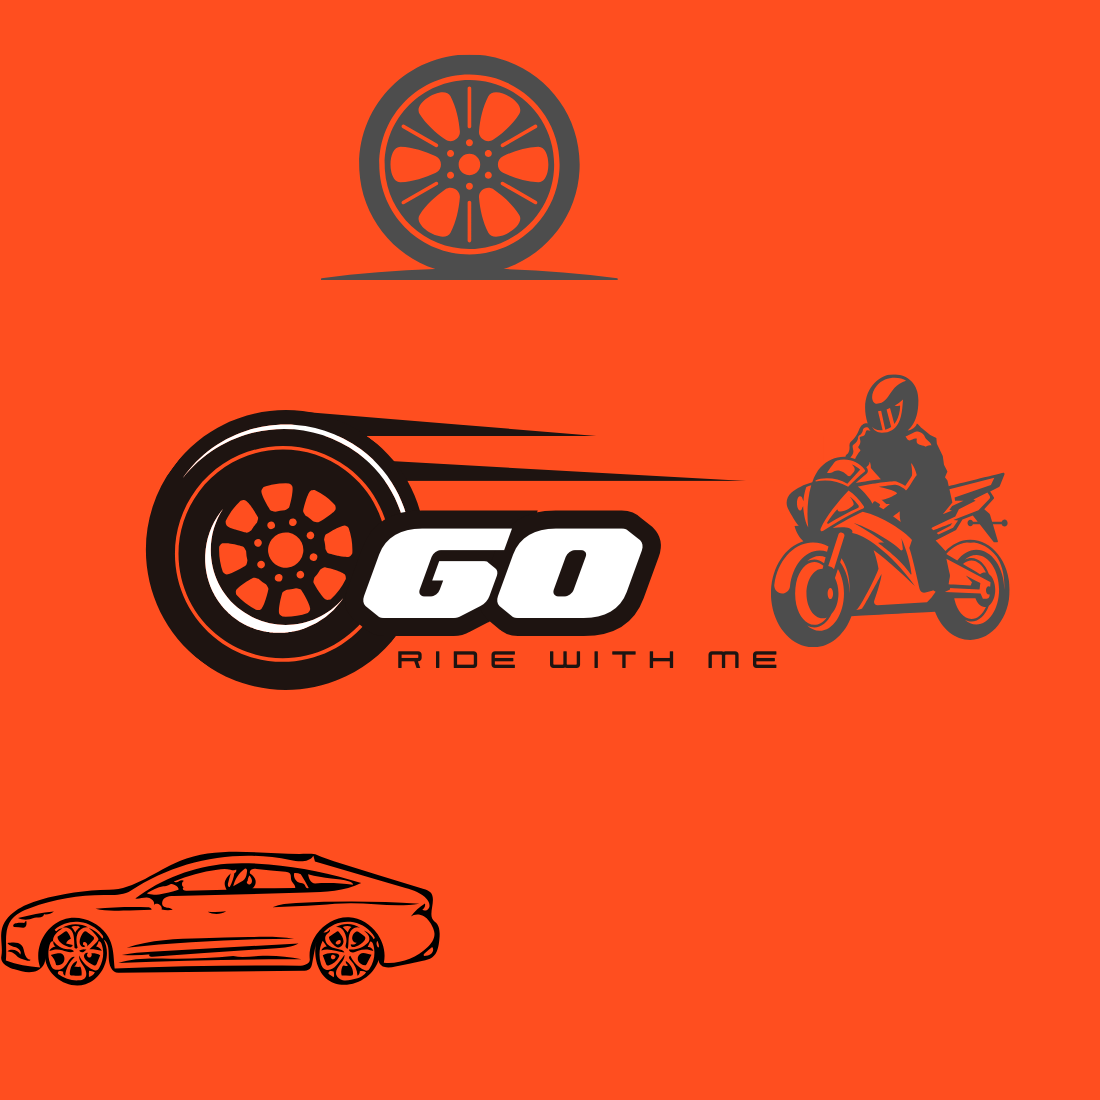 Dynamic Automotive Logo with Bold Typography and Racing Elements cover image.